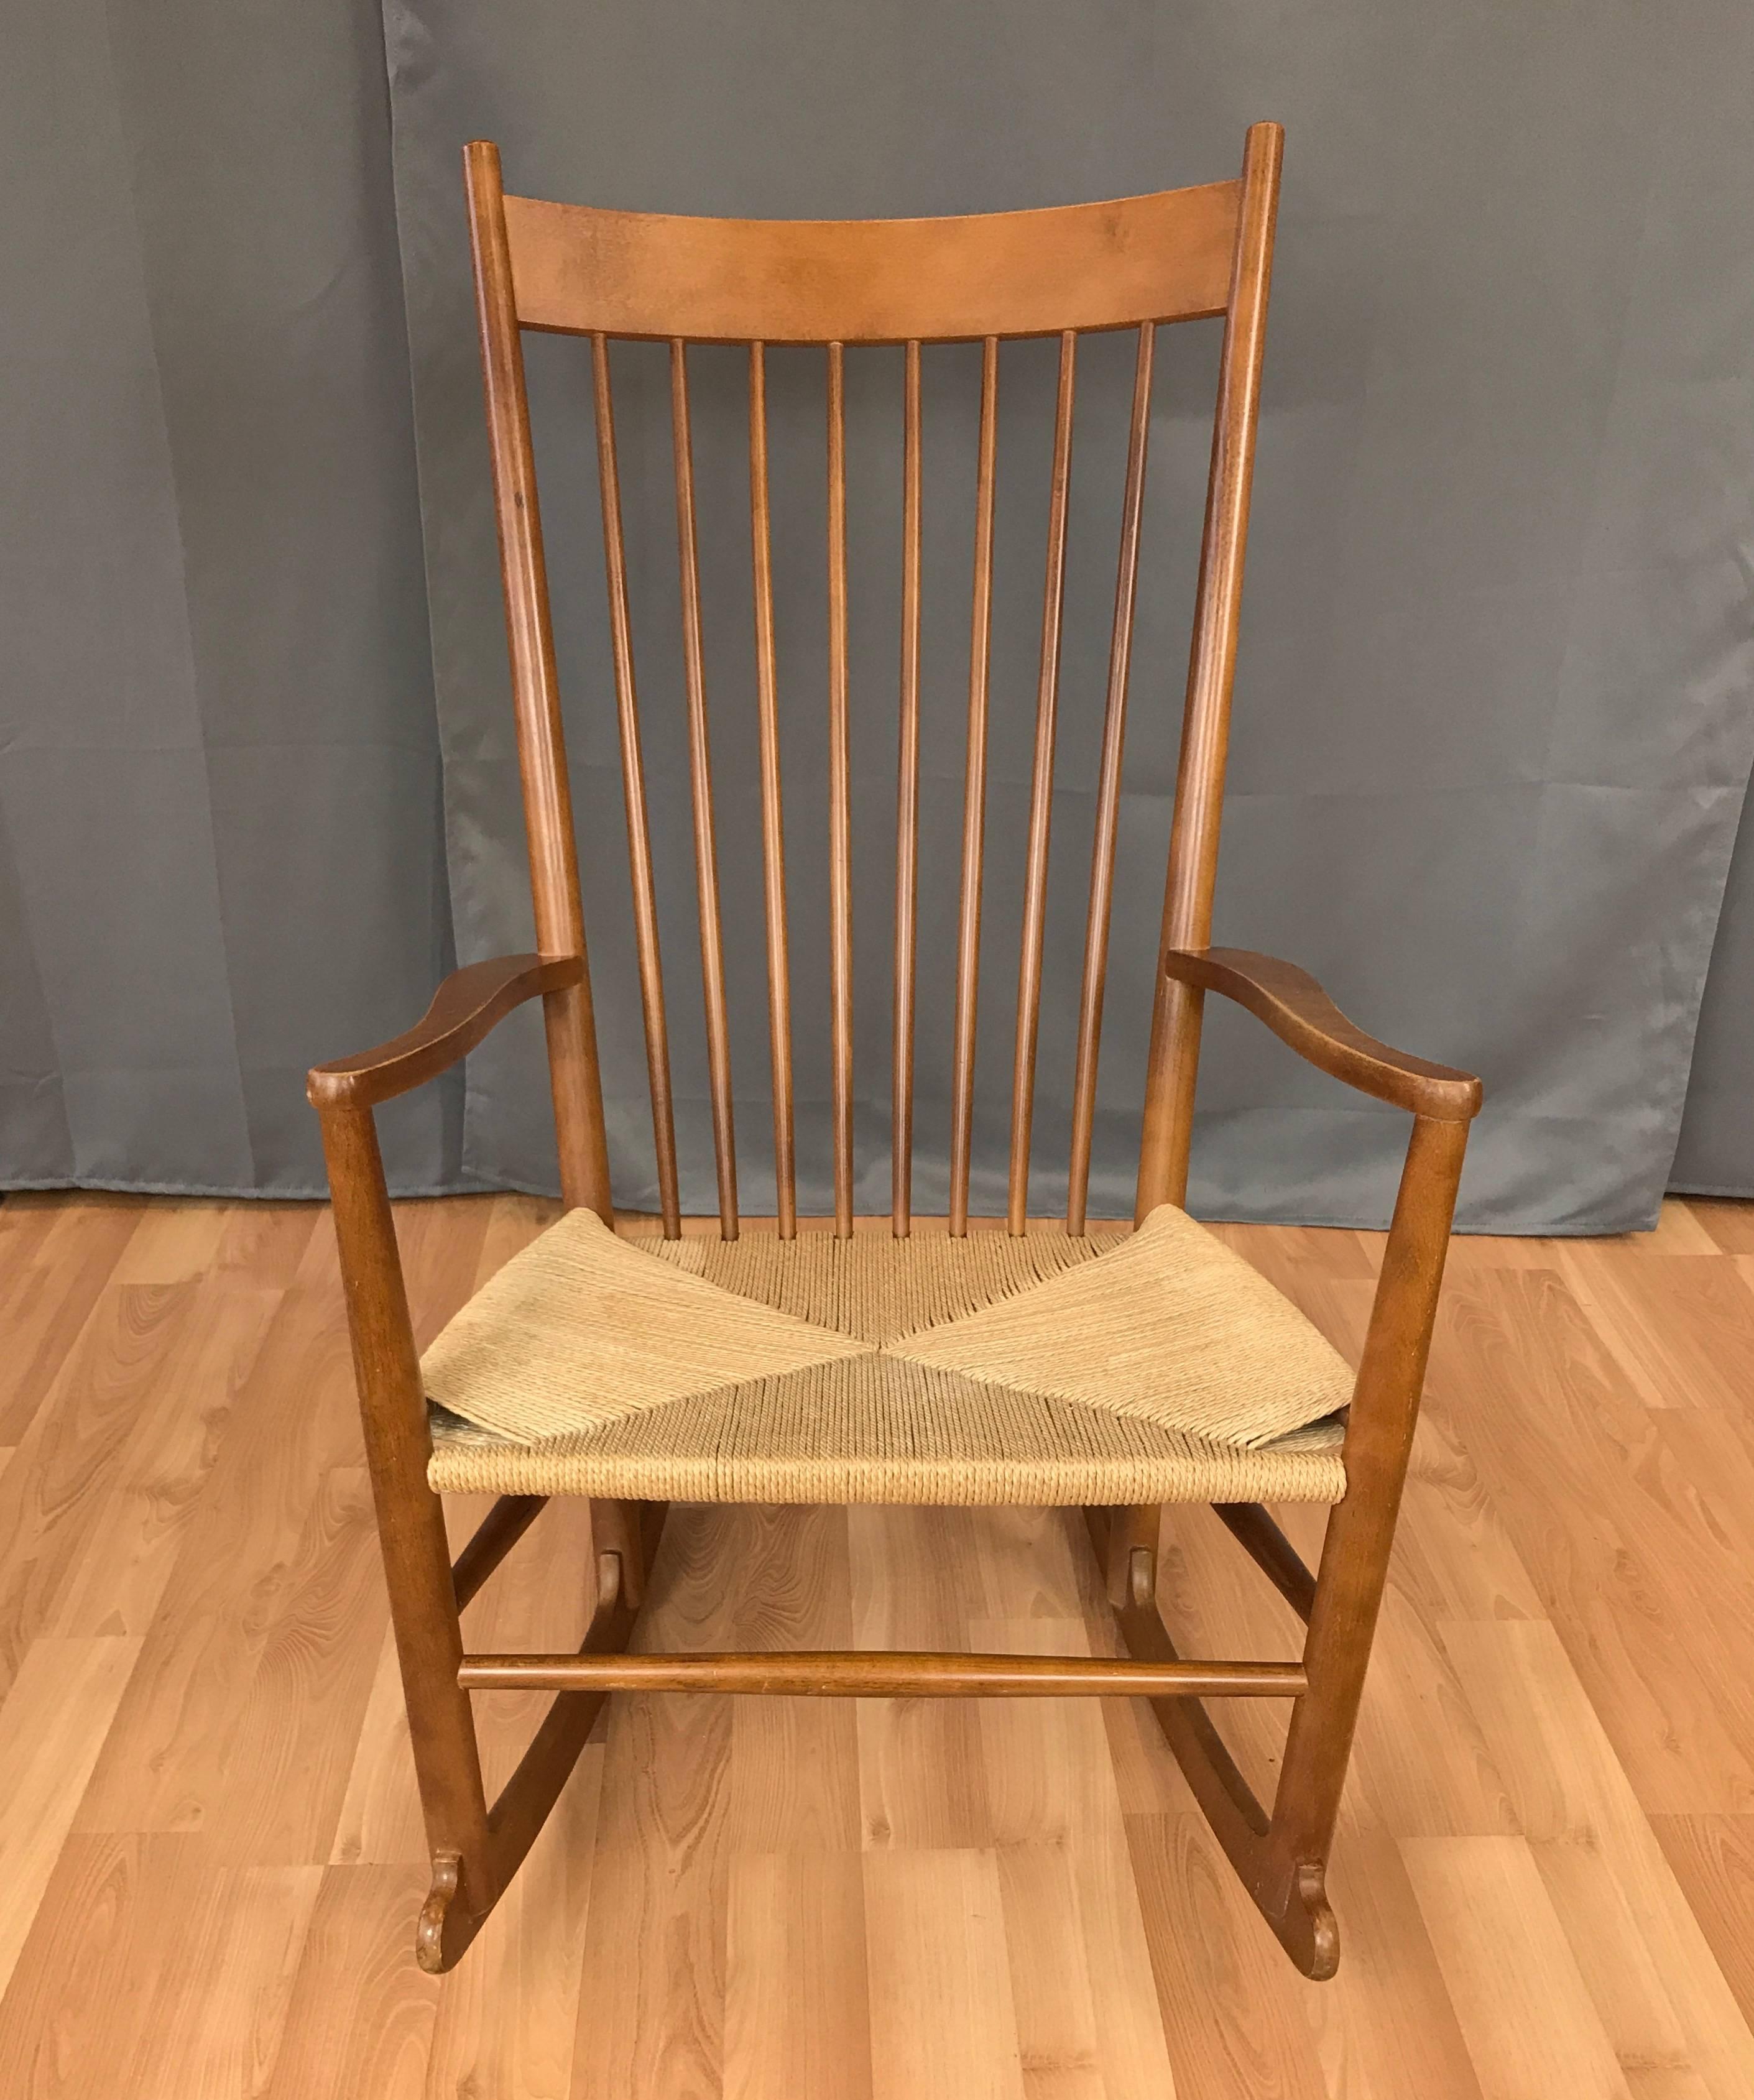 A vintage J16 rocking chair by Hans Wegner in honey-colored beech with woven papercord seat.

Designed in 1944 and initially produced by FDB Møbler, this example dates from 1984 and was manufactured by Fredericia Furniture. Displays Wegner’s